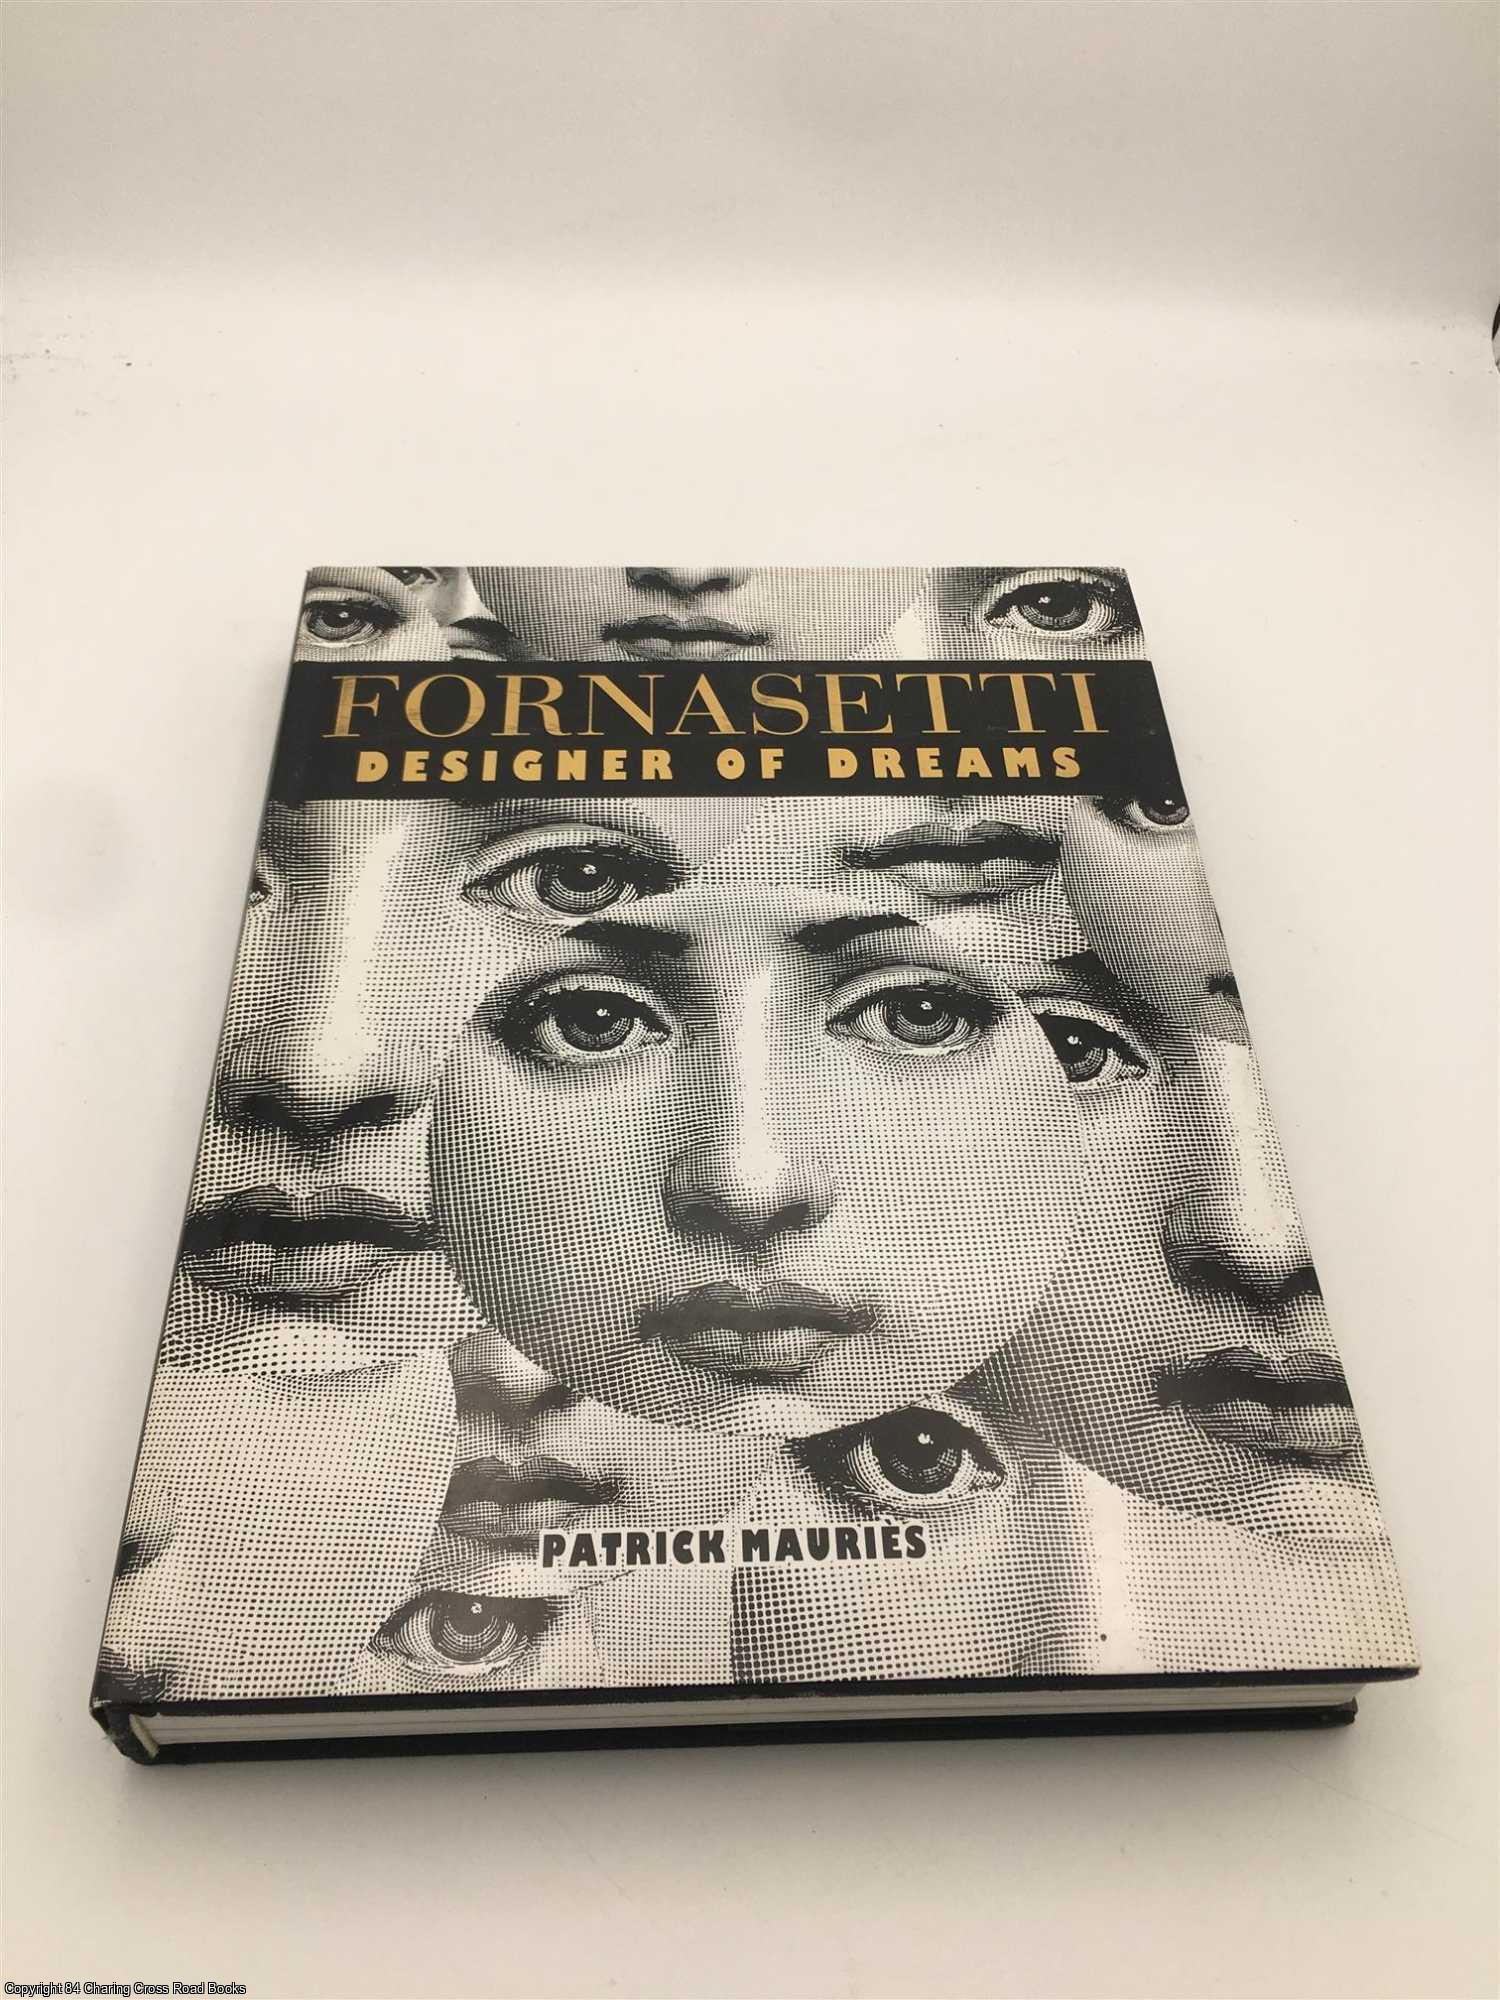 Fornasetti: Designer of Dreams Signed by author by Patrick Mauries on 84  Charing Cross Rare Books